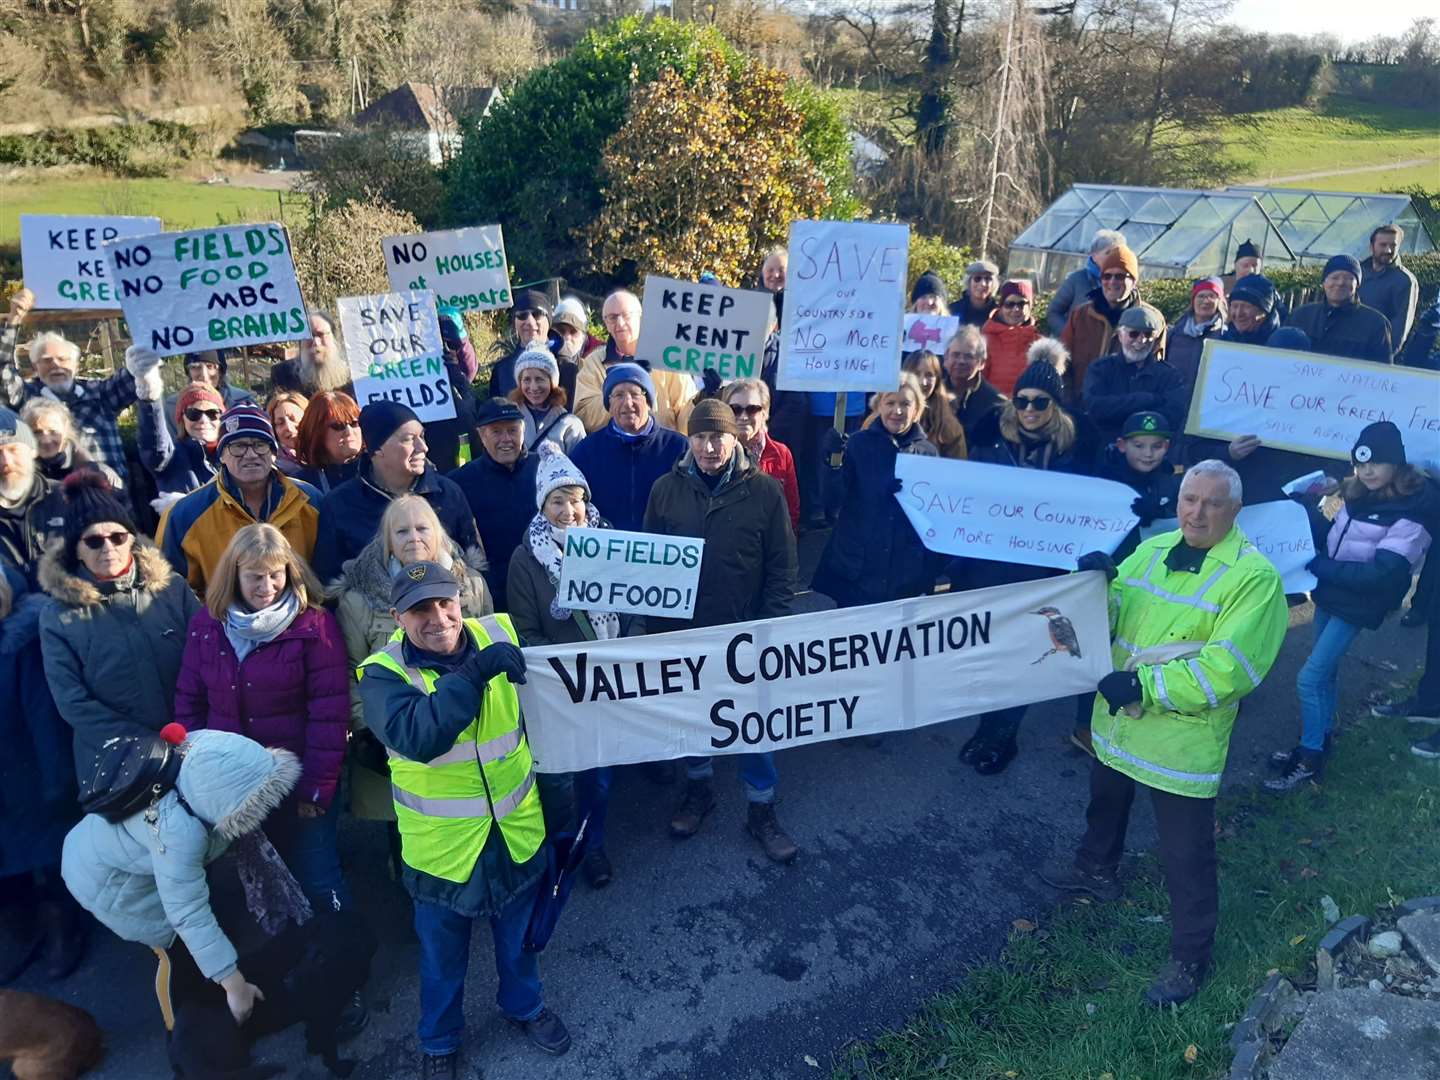 The Valley Conservation Society joined the Day of Action